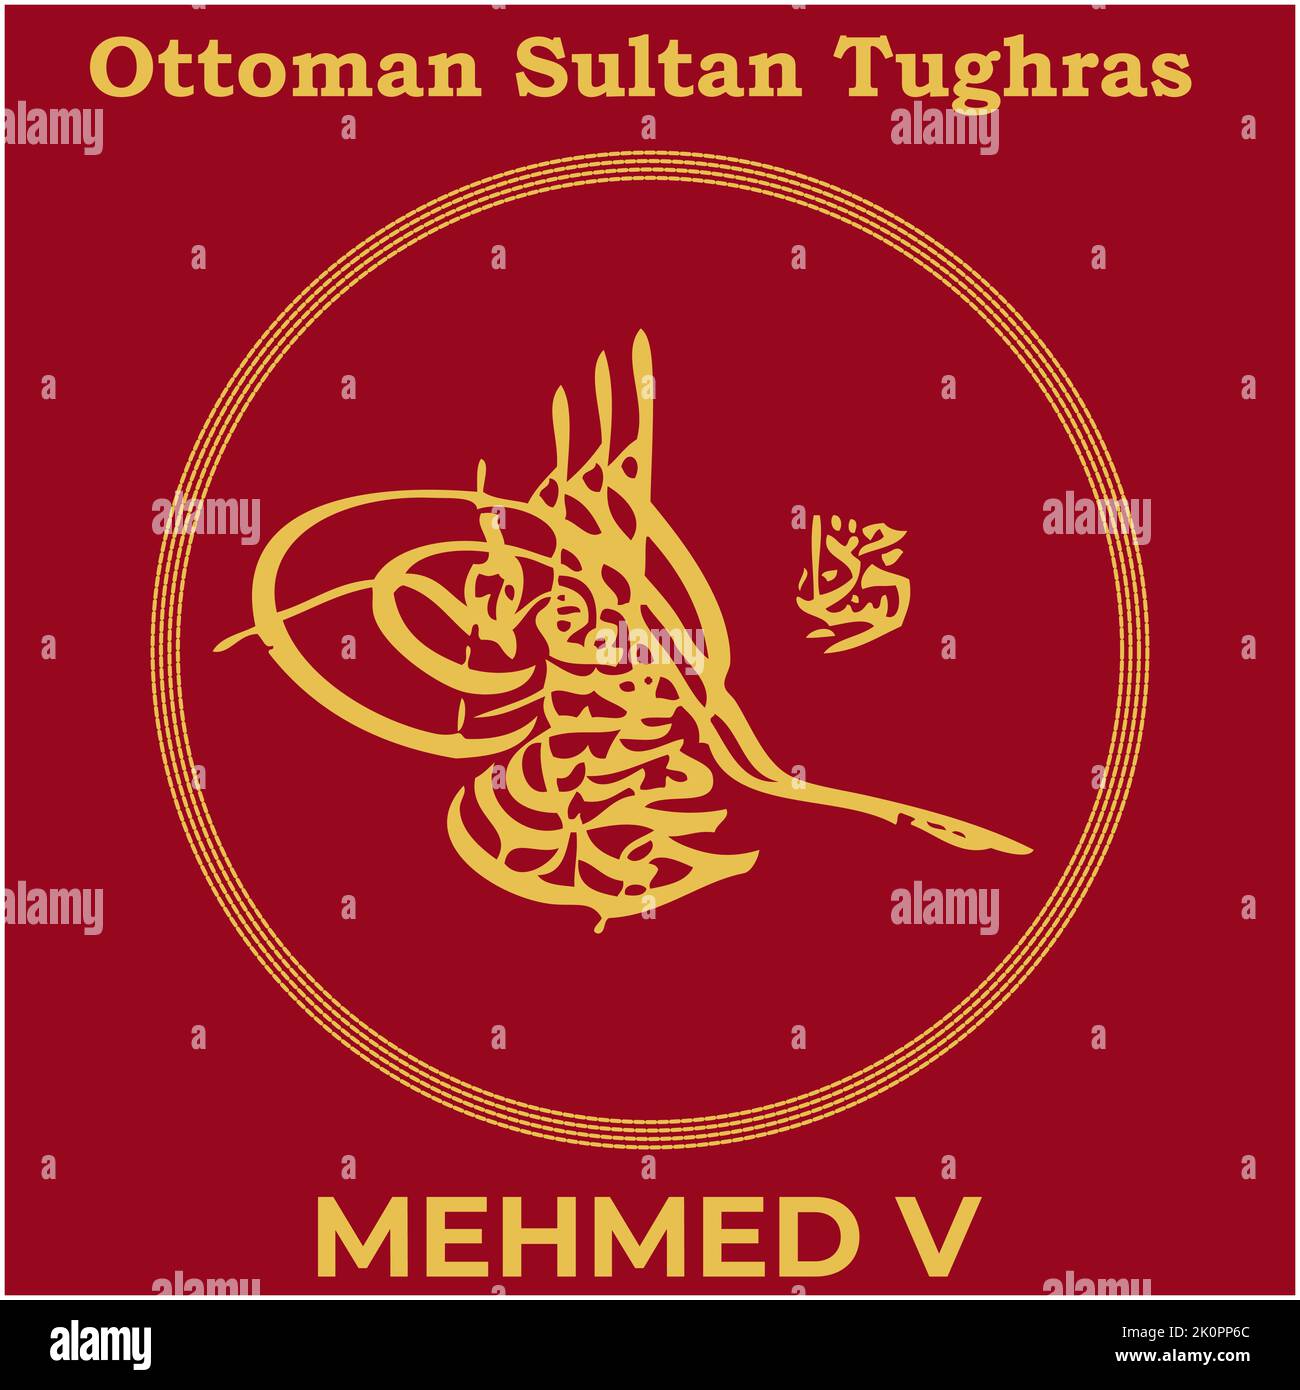 Vector image with Tughra signature of Ottoman Thirty-Fifth Sultan Mehmed V, Tughra of Mehmed V with traditional Turkish painting background. Stock Vector